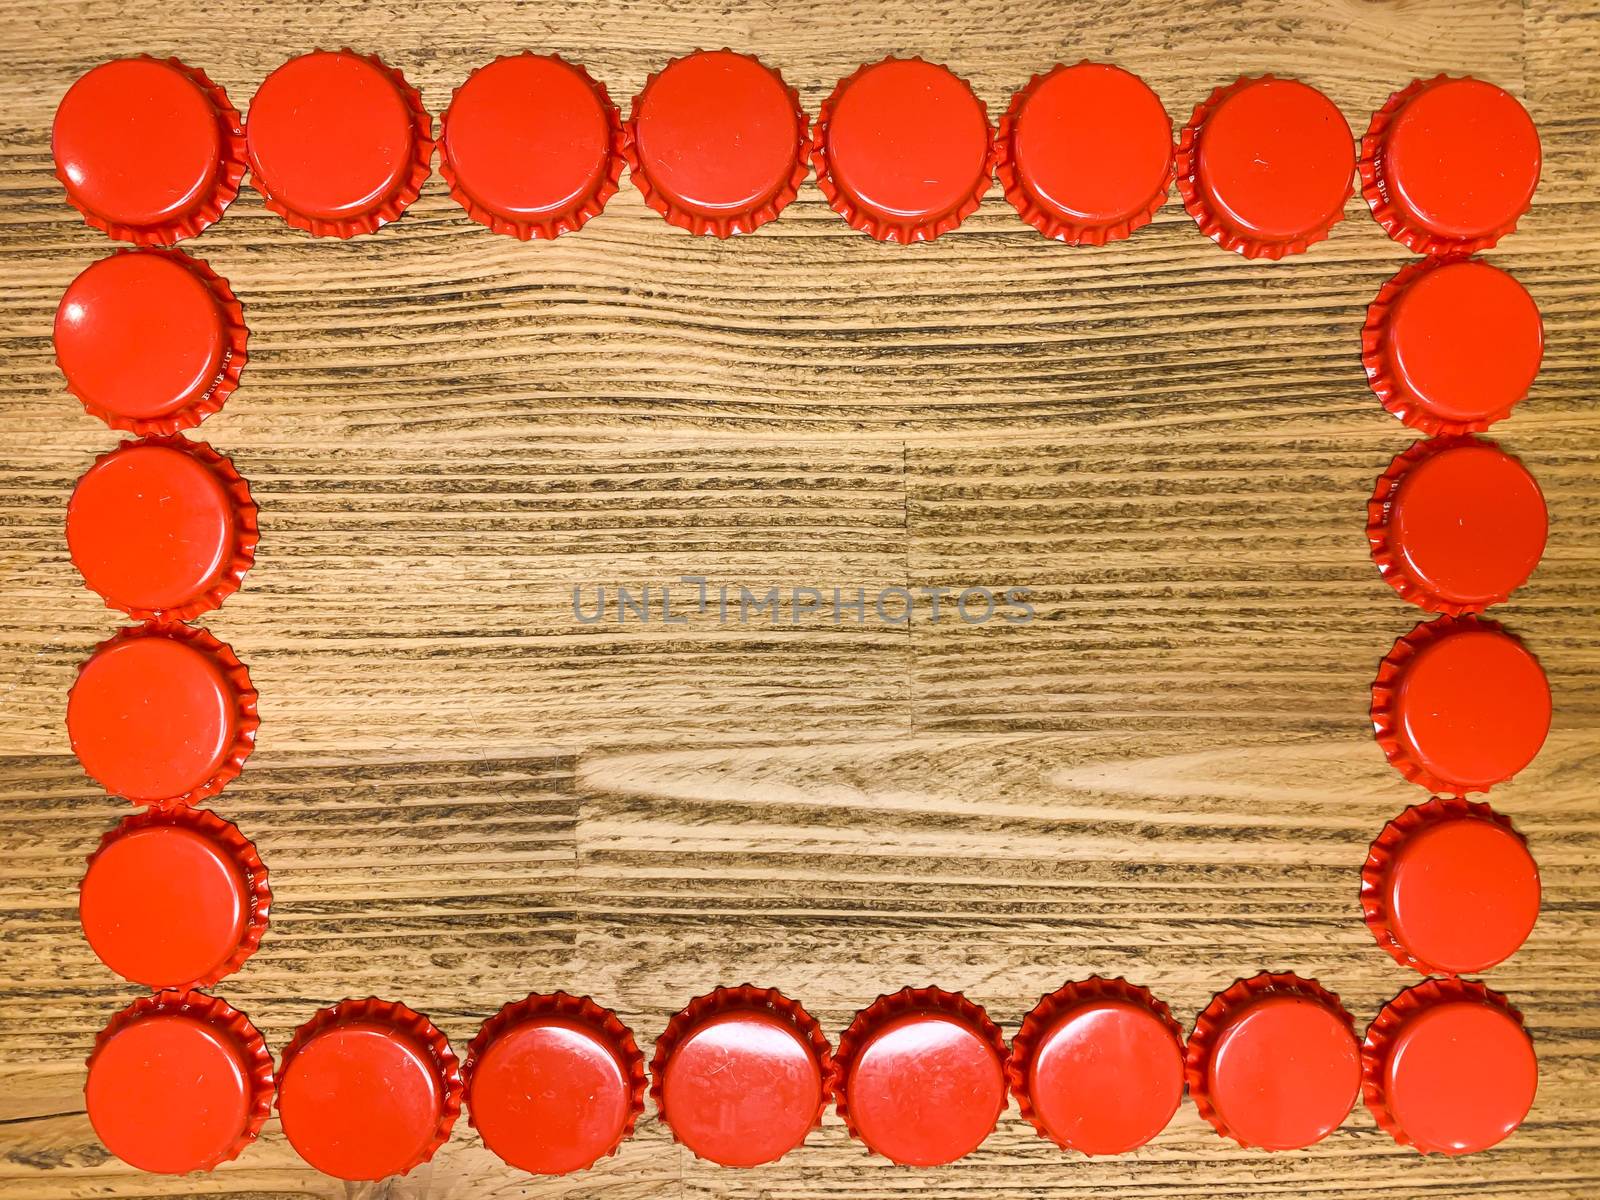 A frame made from red beer bottle tops lids on a rustic wooden table. Beer drinkers postcard concept, top view horizontal stock image with empty space for text